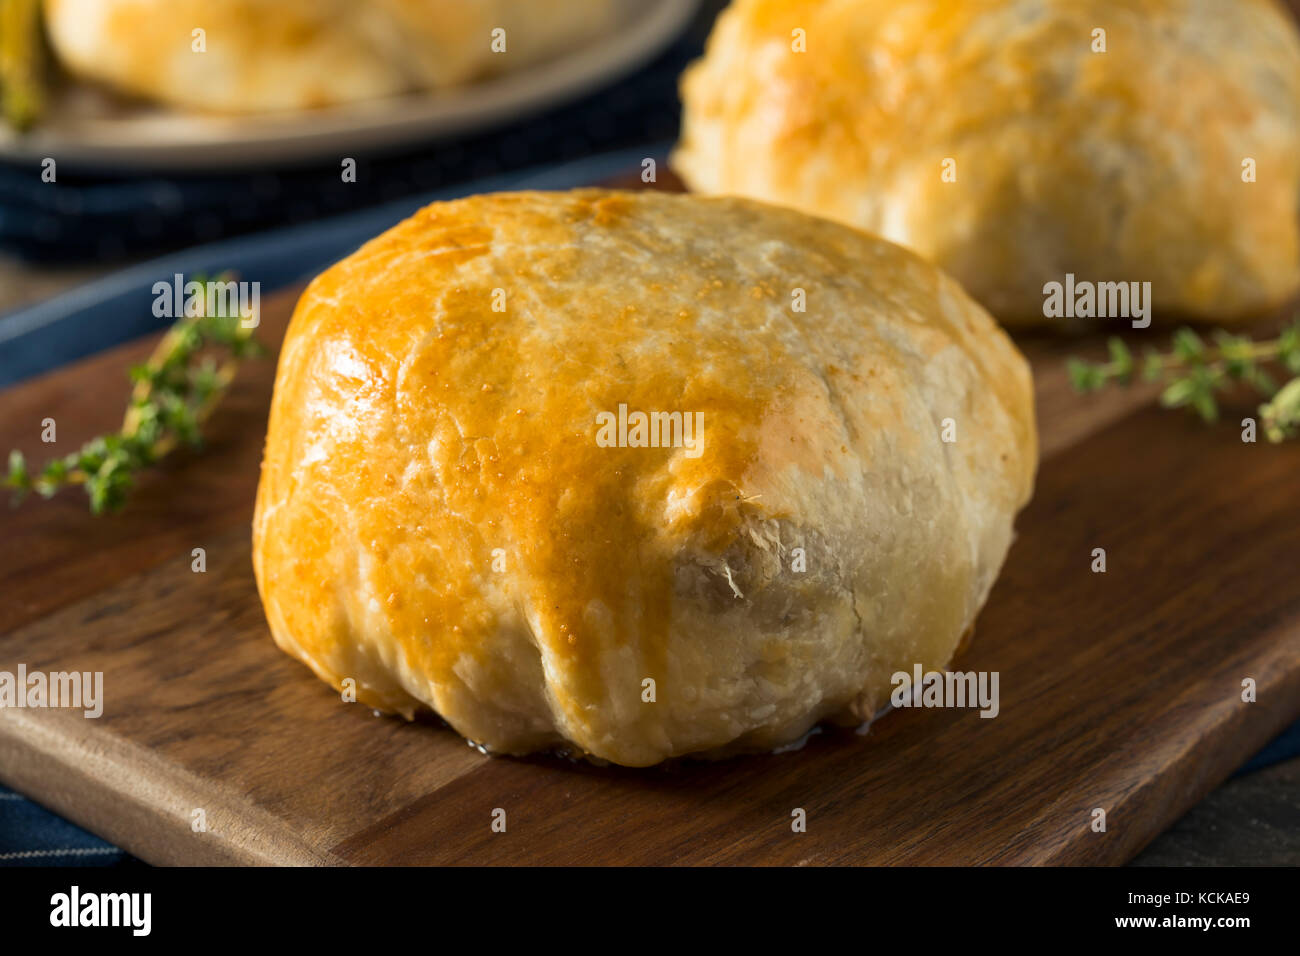 Homemade Gourmet Individual Beef Wellington Ready to Eat Stock Photo